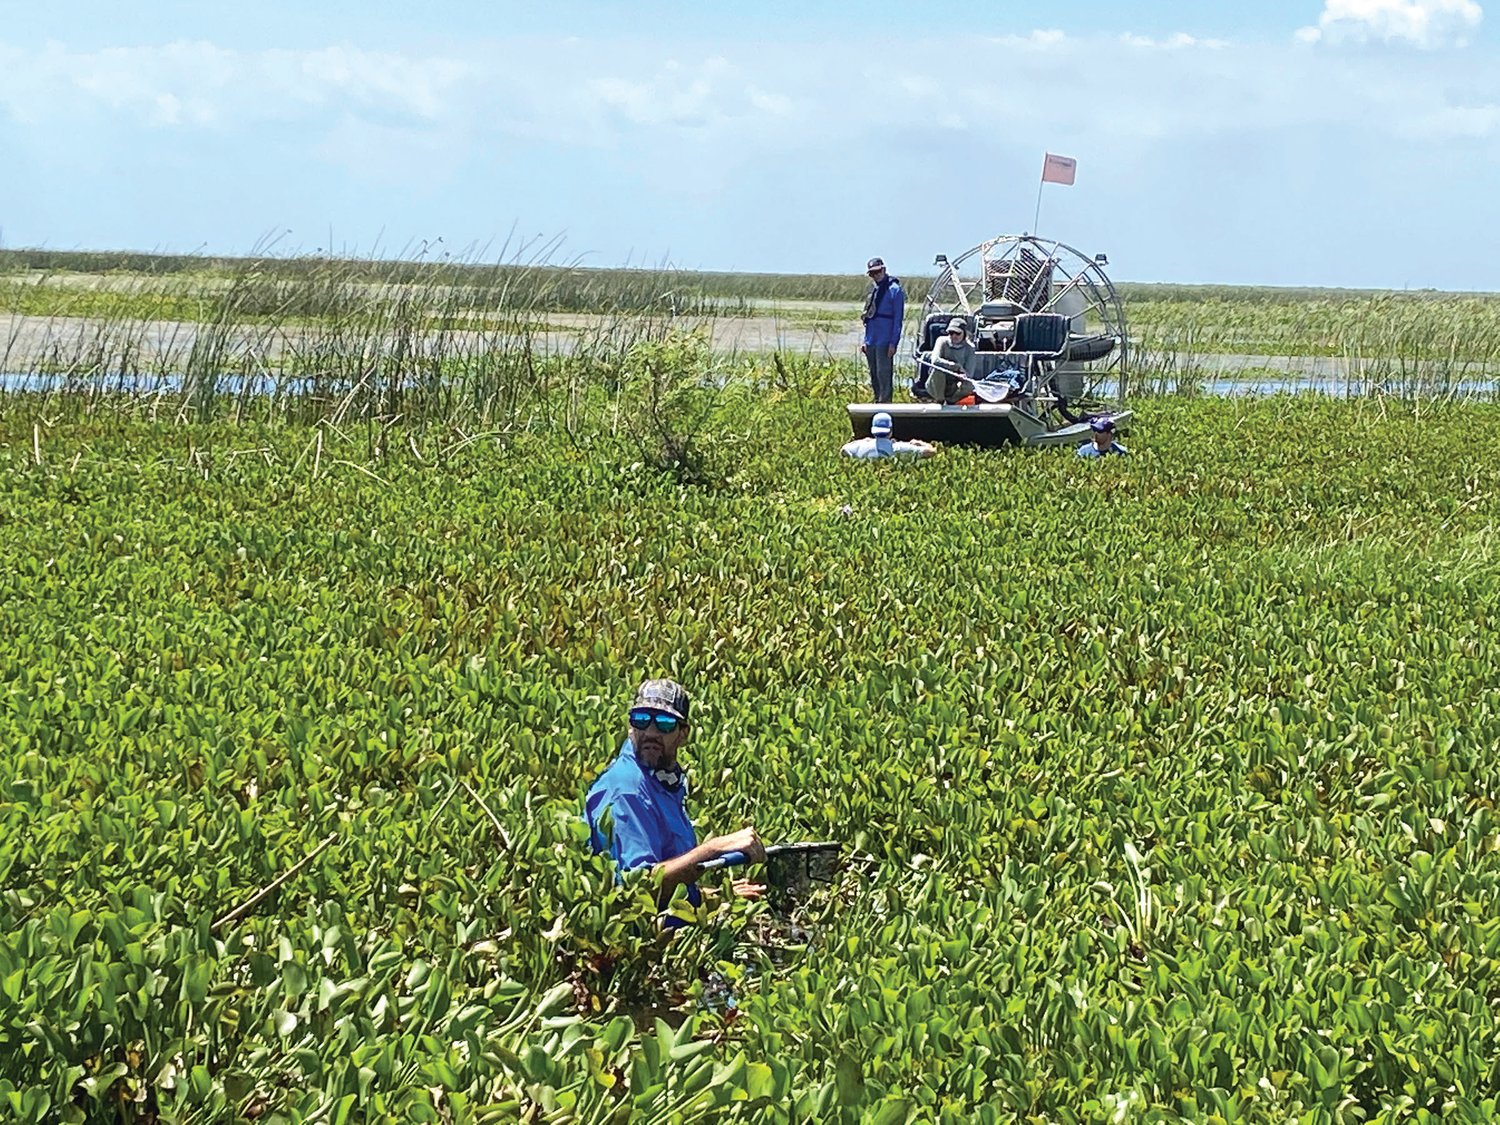 Volunteers worked alongside FWC staff hand pulling Azolla pinnata, a nonnative plant that spreads rapidly and forms dense mats that shade out native submersed plants and interferes with boating and other recreational activities.